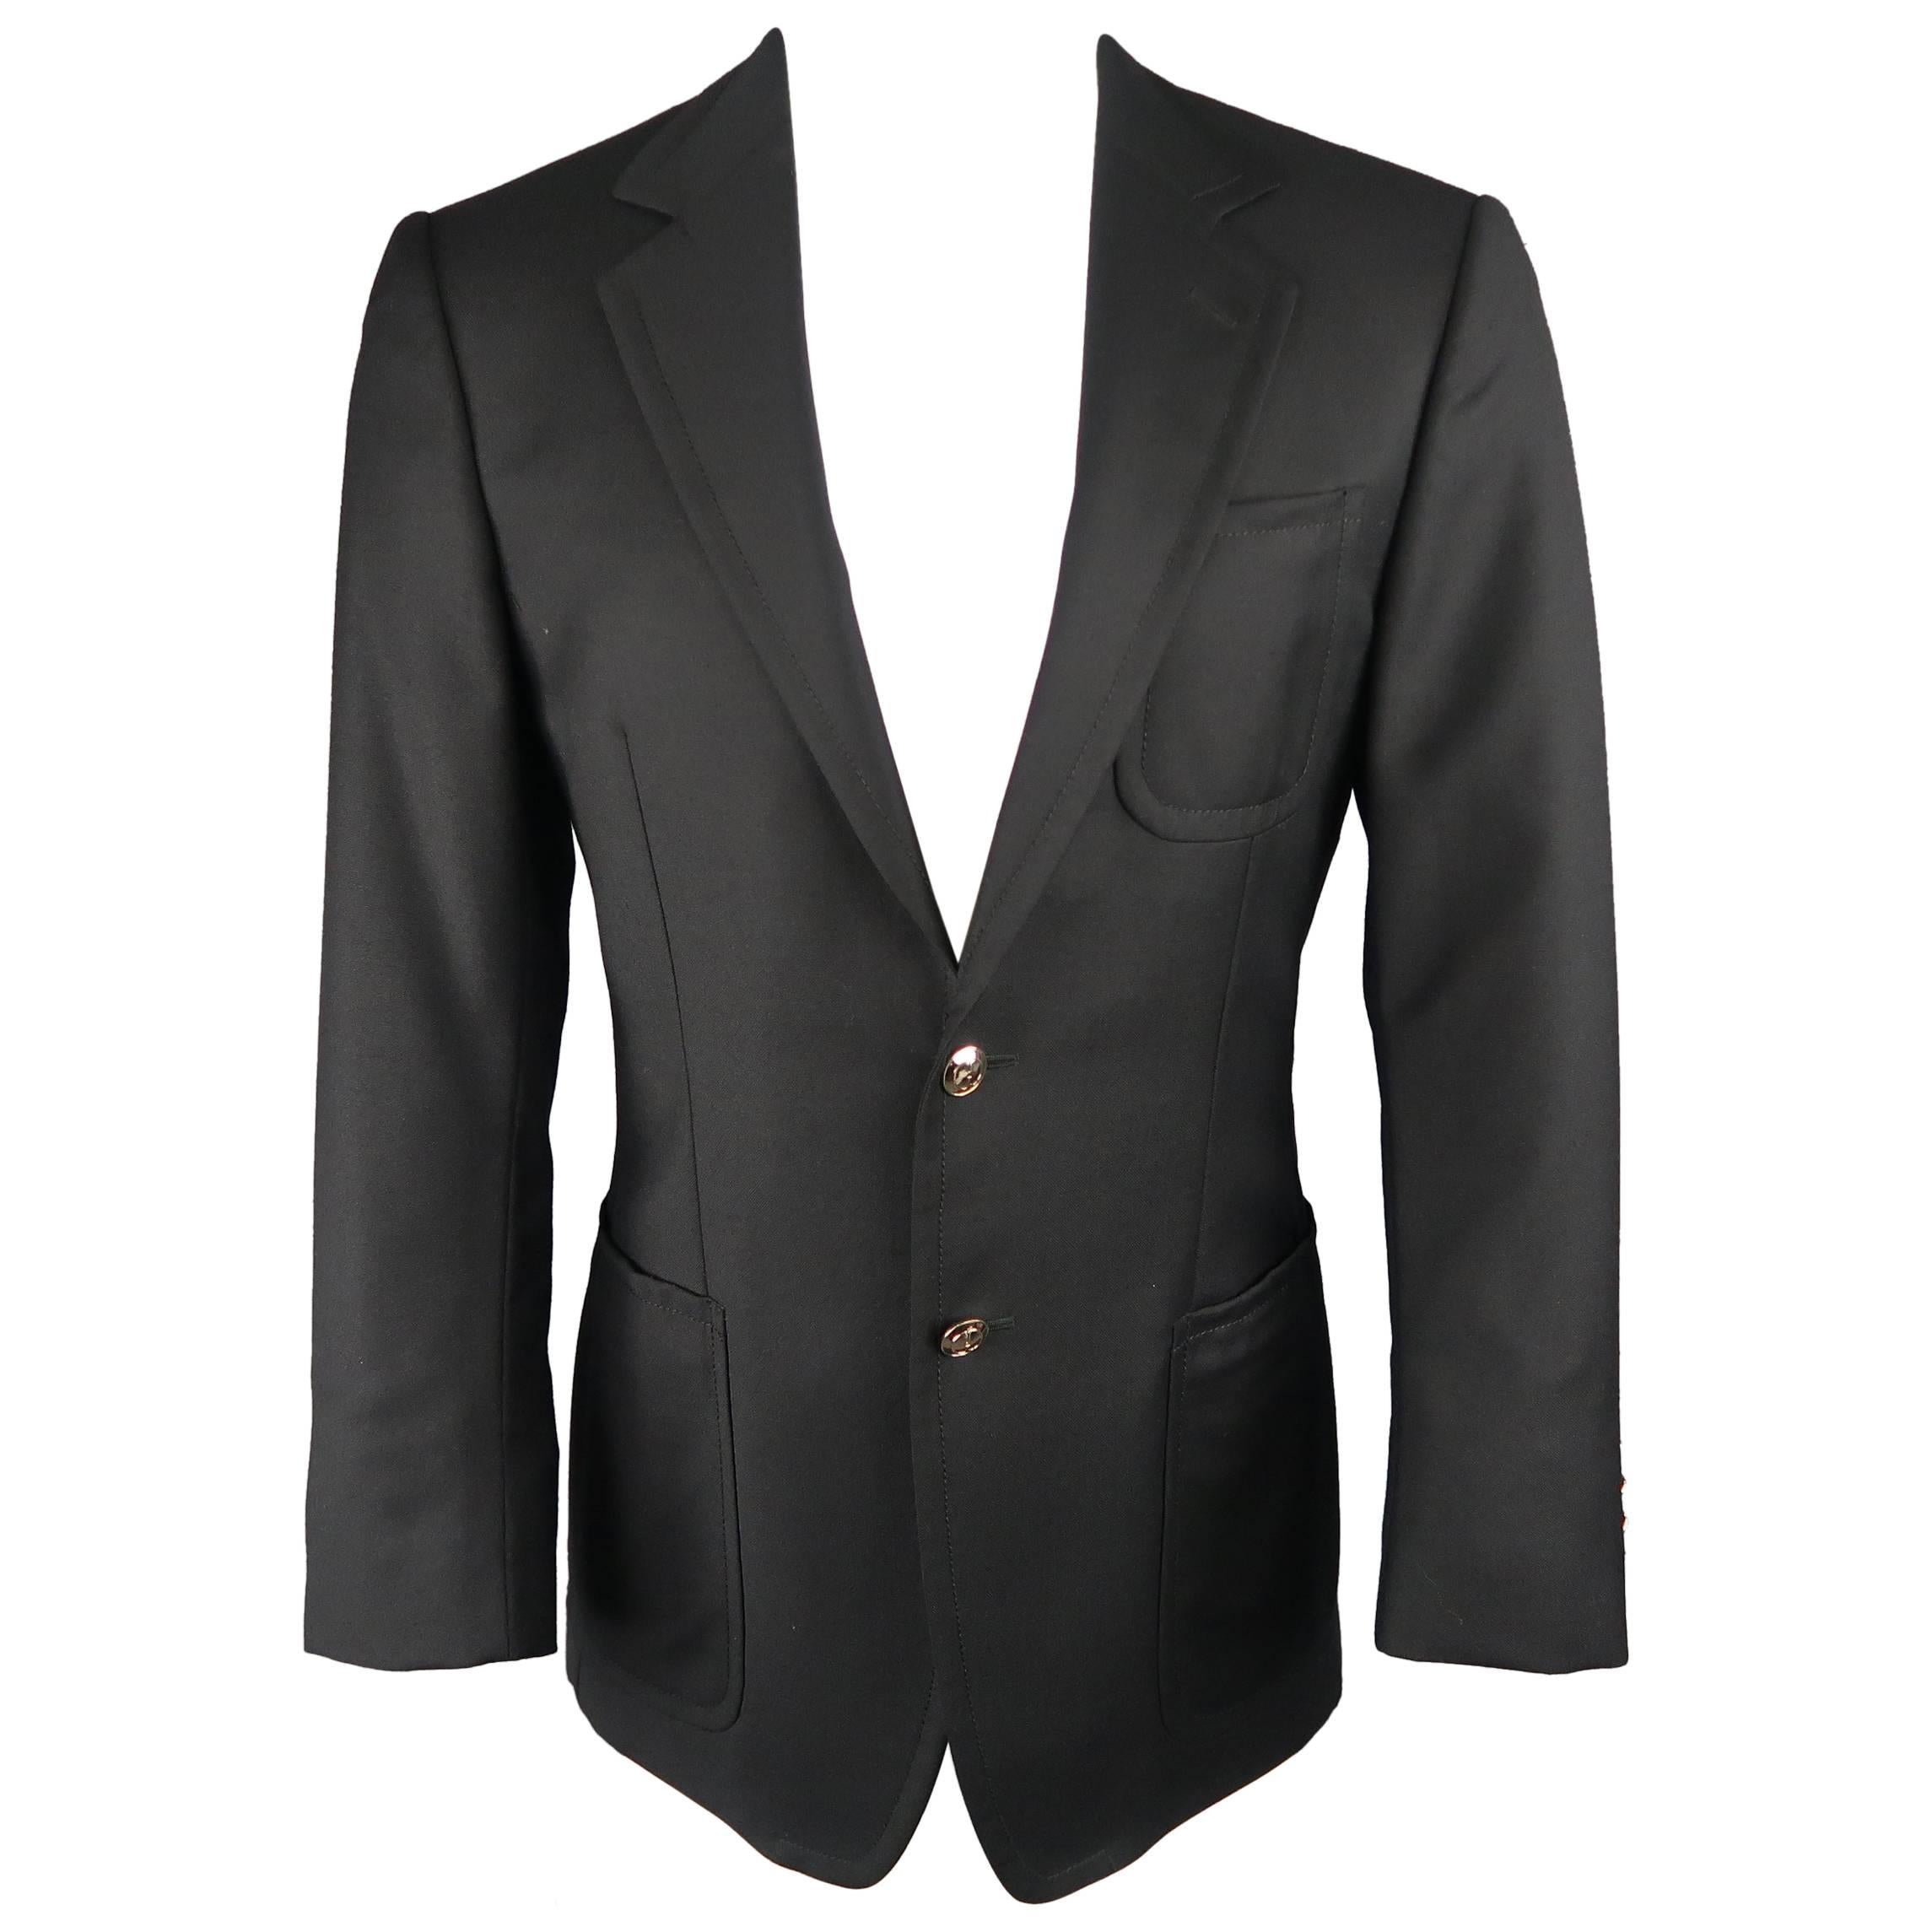 Gucci Men's Black Solid Wool Gold Button Patch Pocket Sport Coat